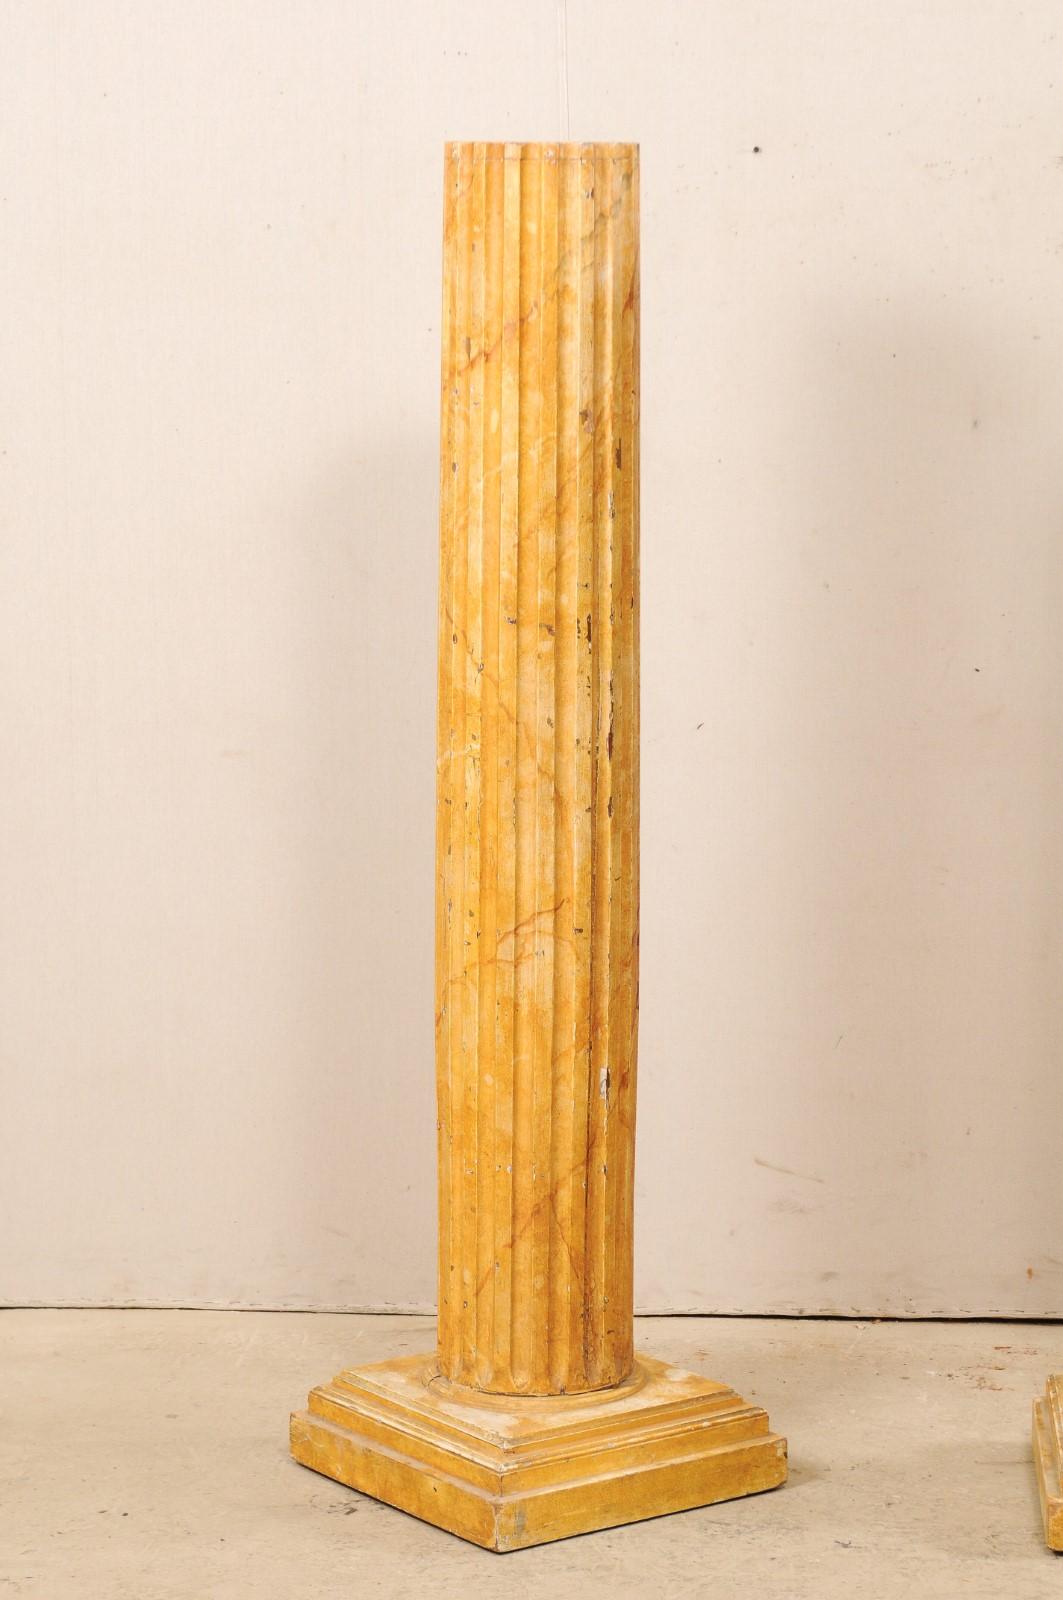 French Pair of Fluted Columns with Faux Marble Finish, Mid-20th Century For Sale 1